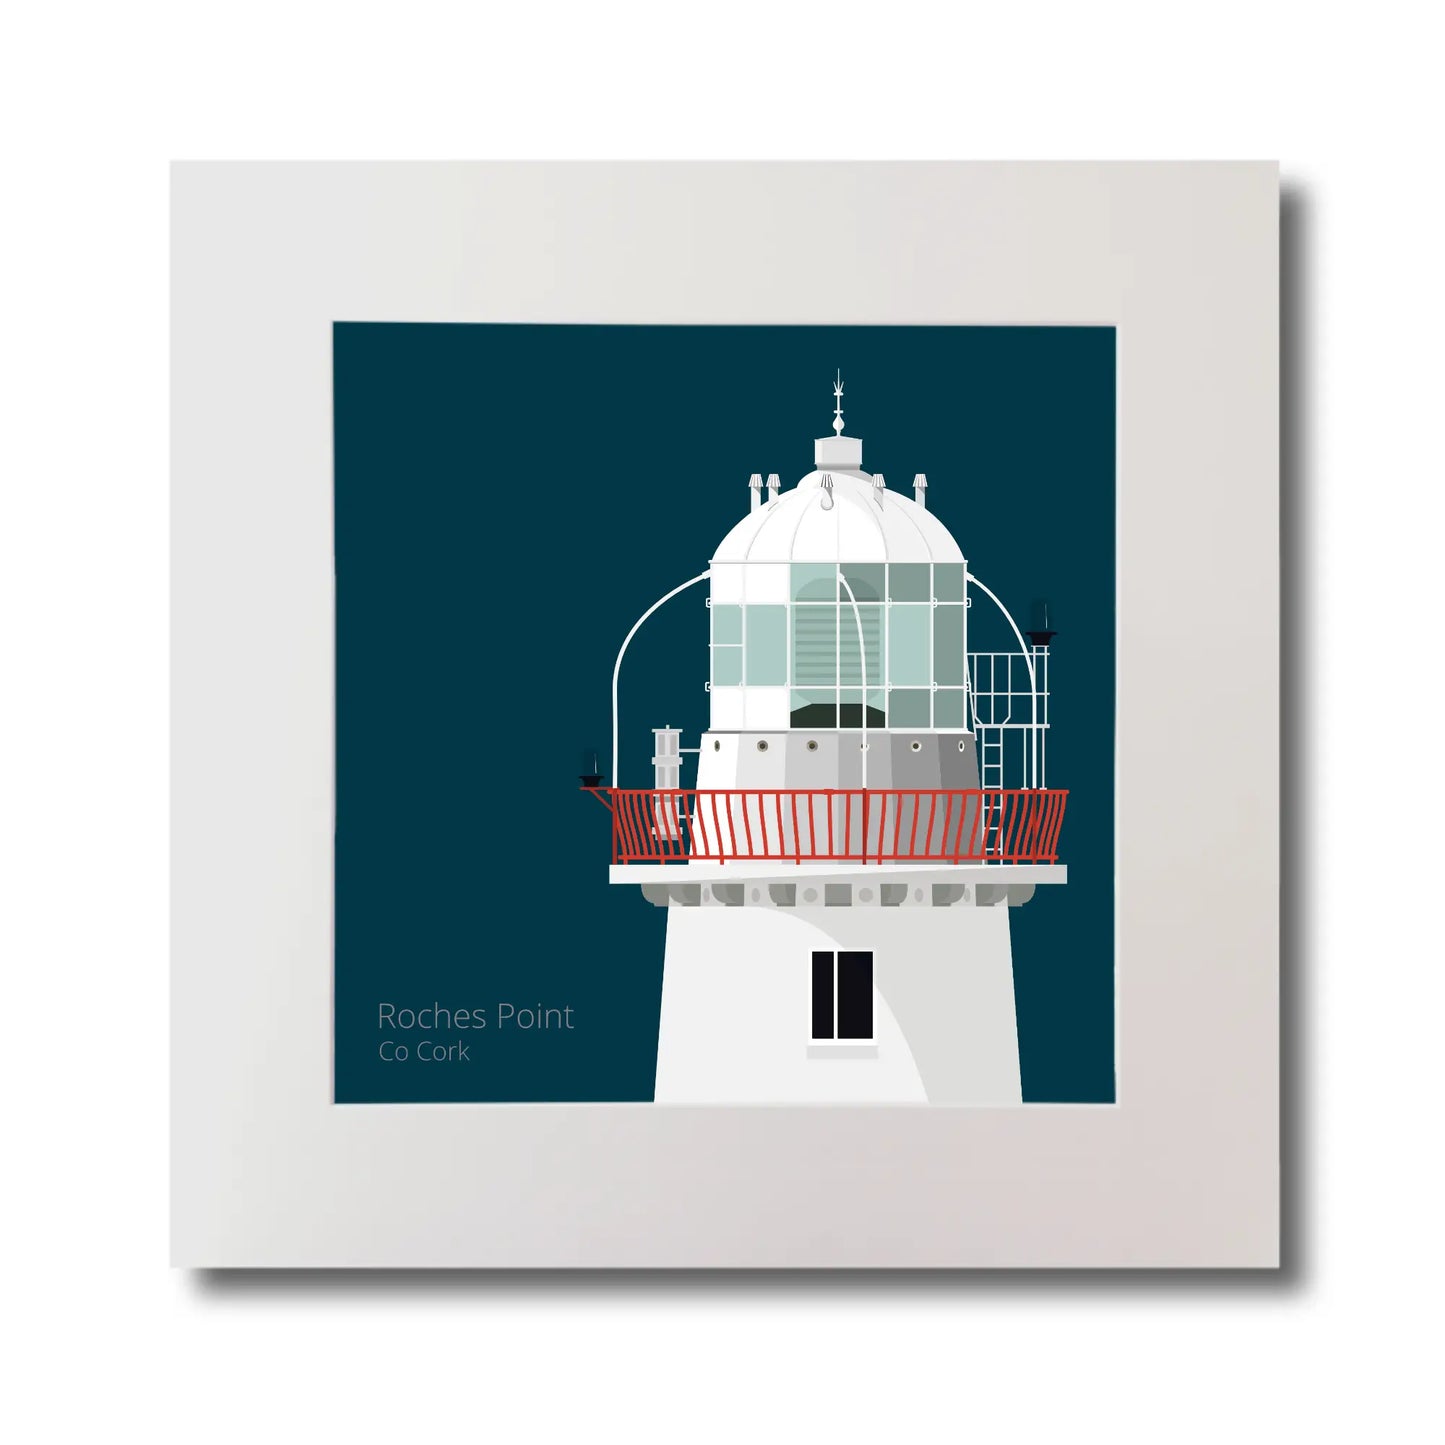 Illustration of Roches Point lighthouse on a midnight blue background, mounted and measuring 30x30cm.